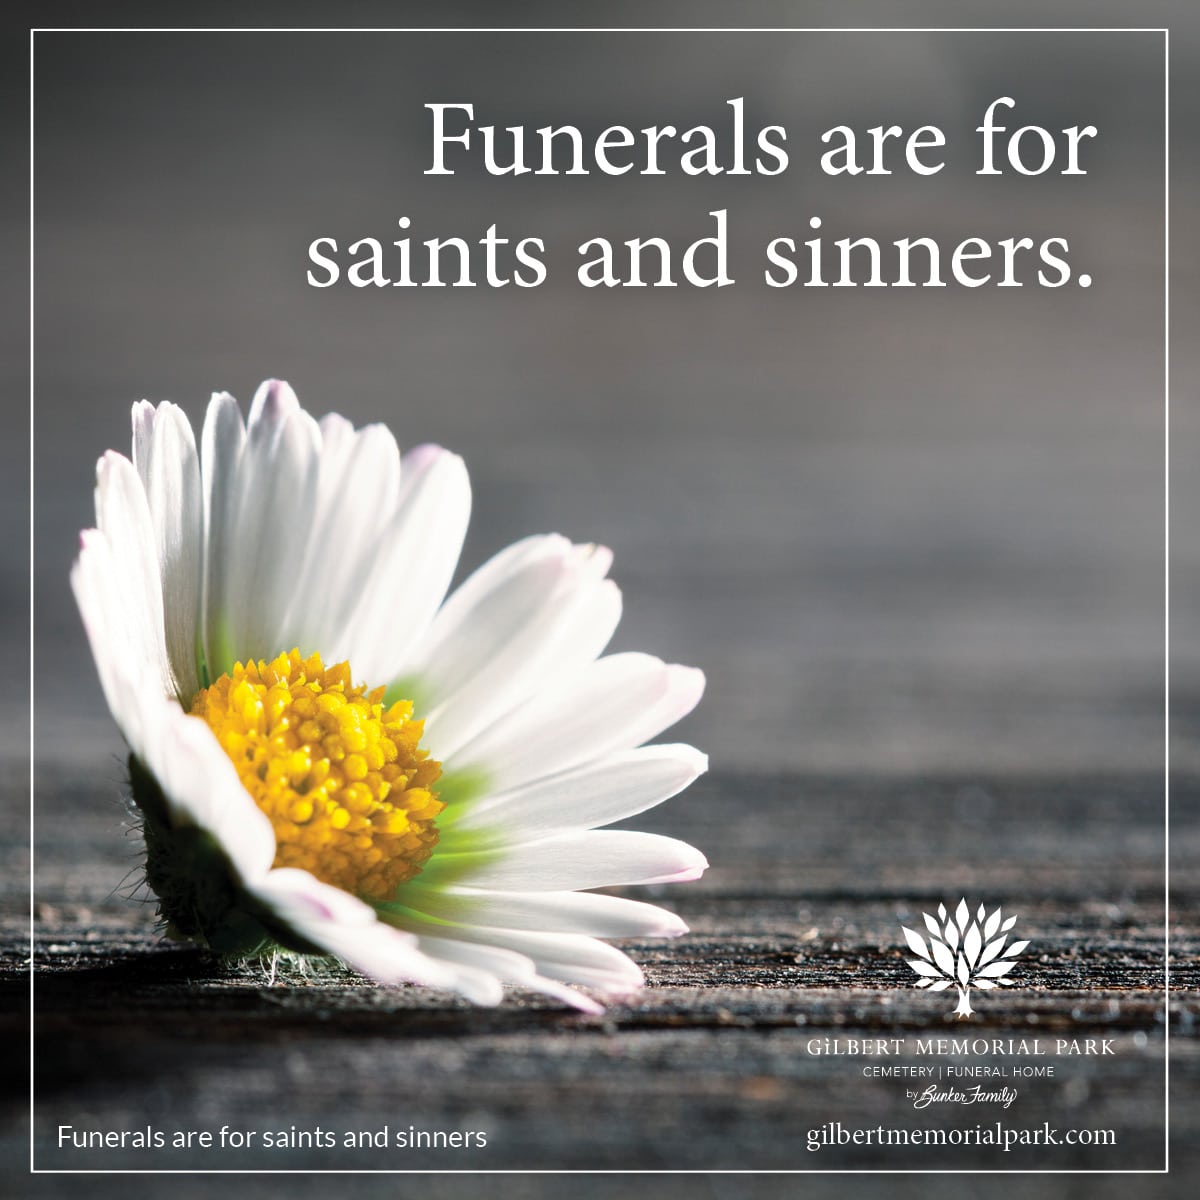 Funerals are for Saints and Sinners